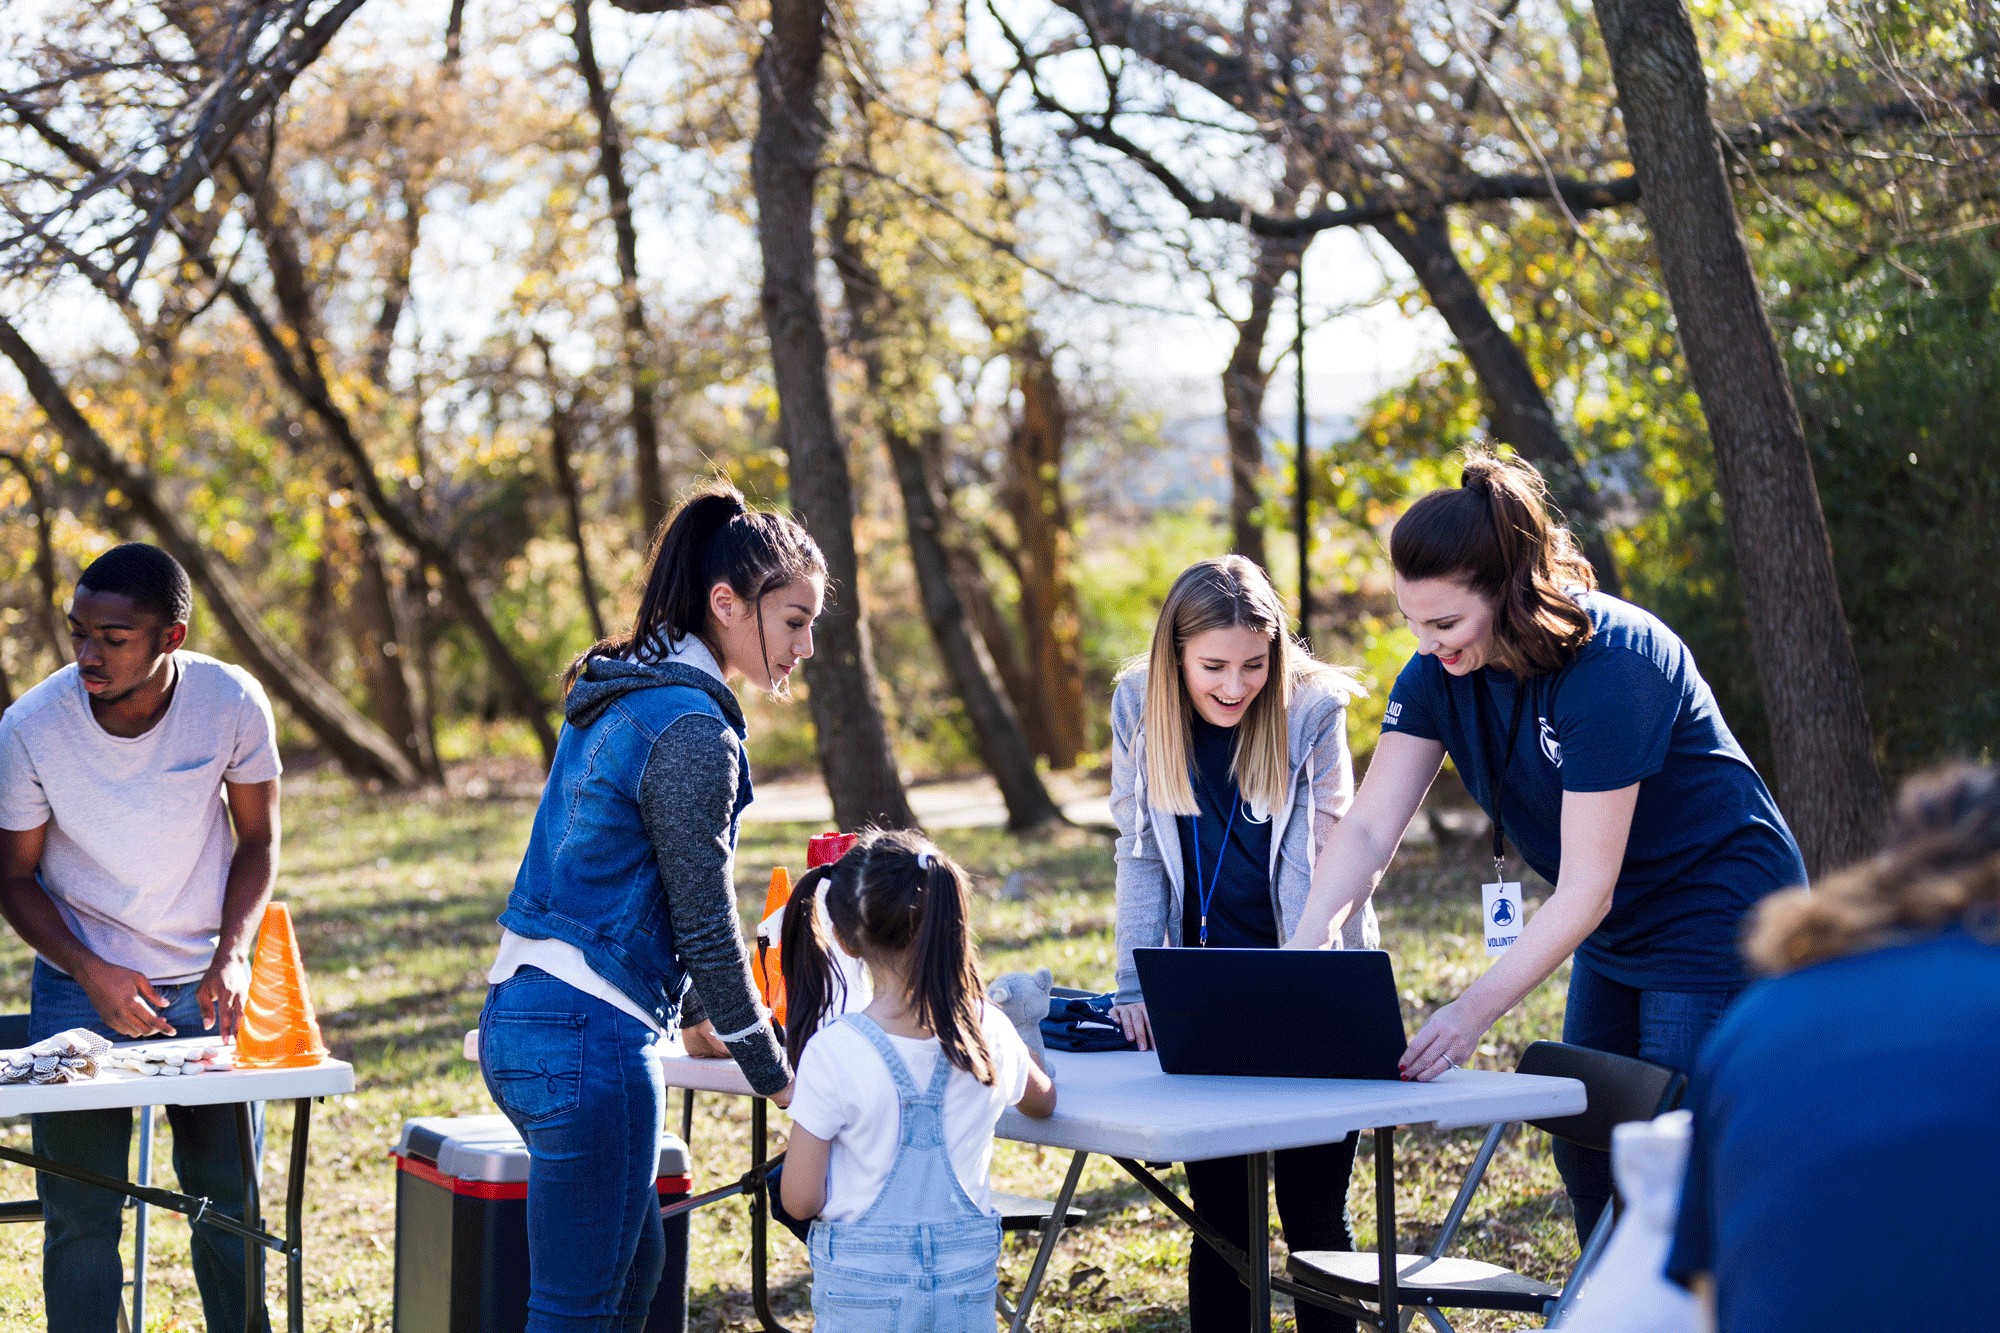 a group of adults and children using a laptop in a park